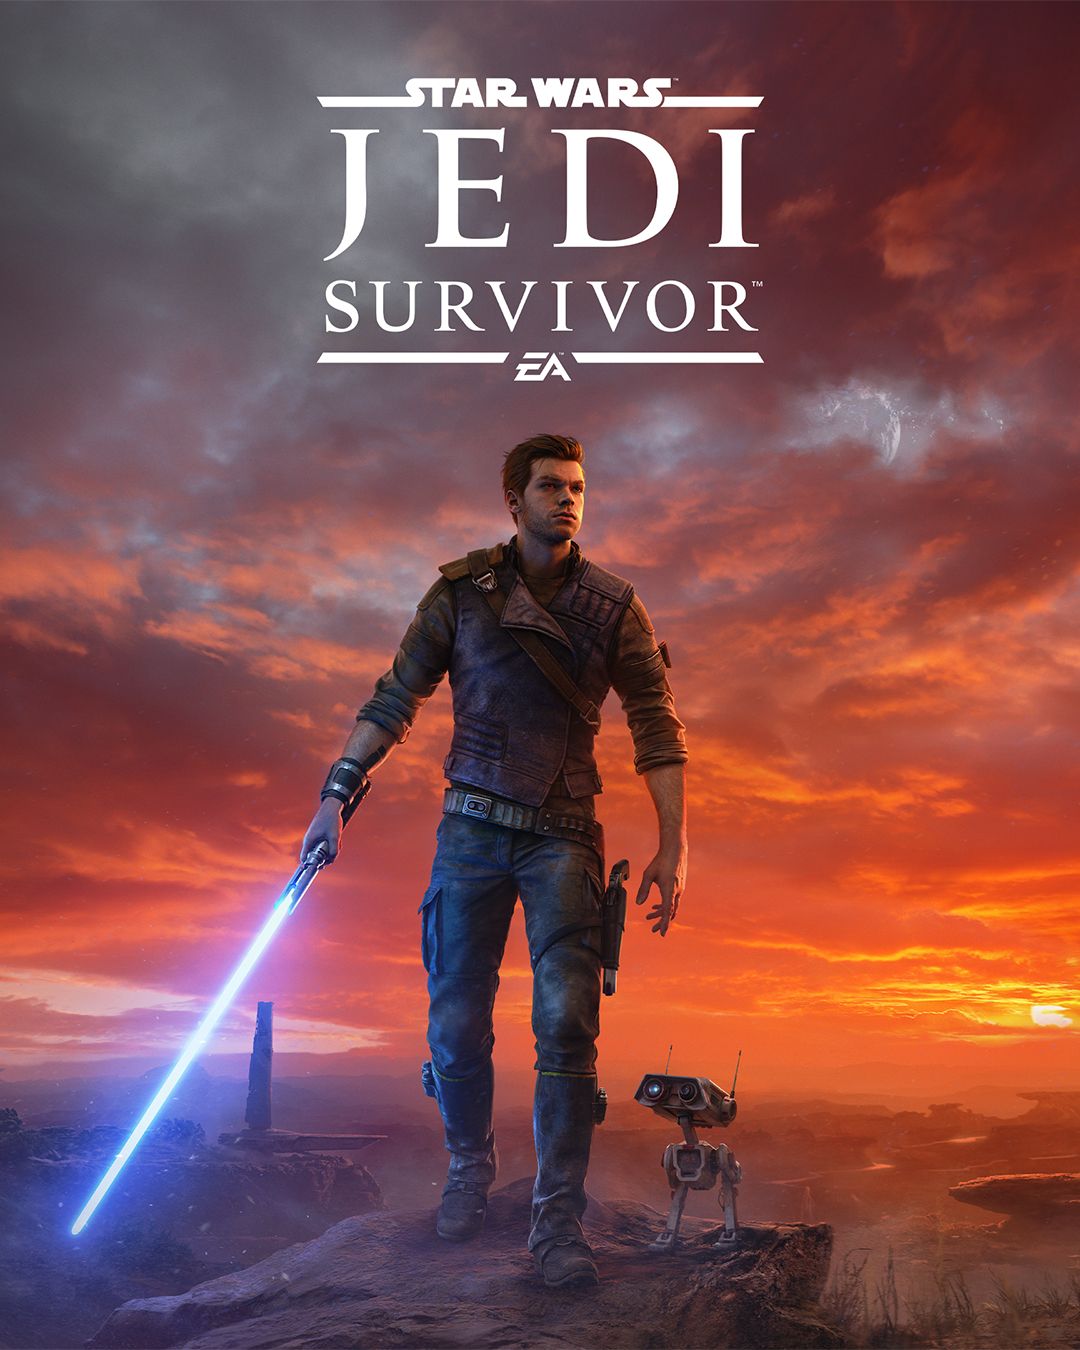 Cal Kestis walking with his lightsaber out in art from the Star Wars Jedi Survivor Poster